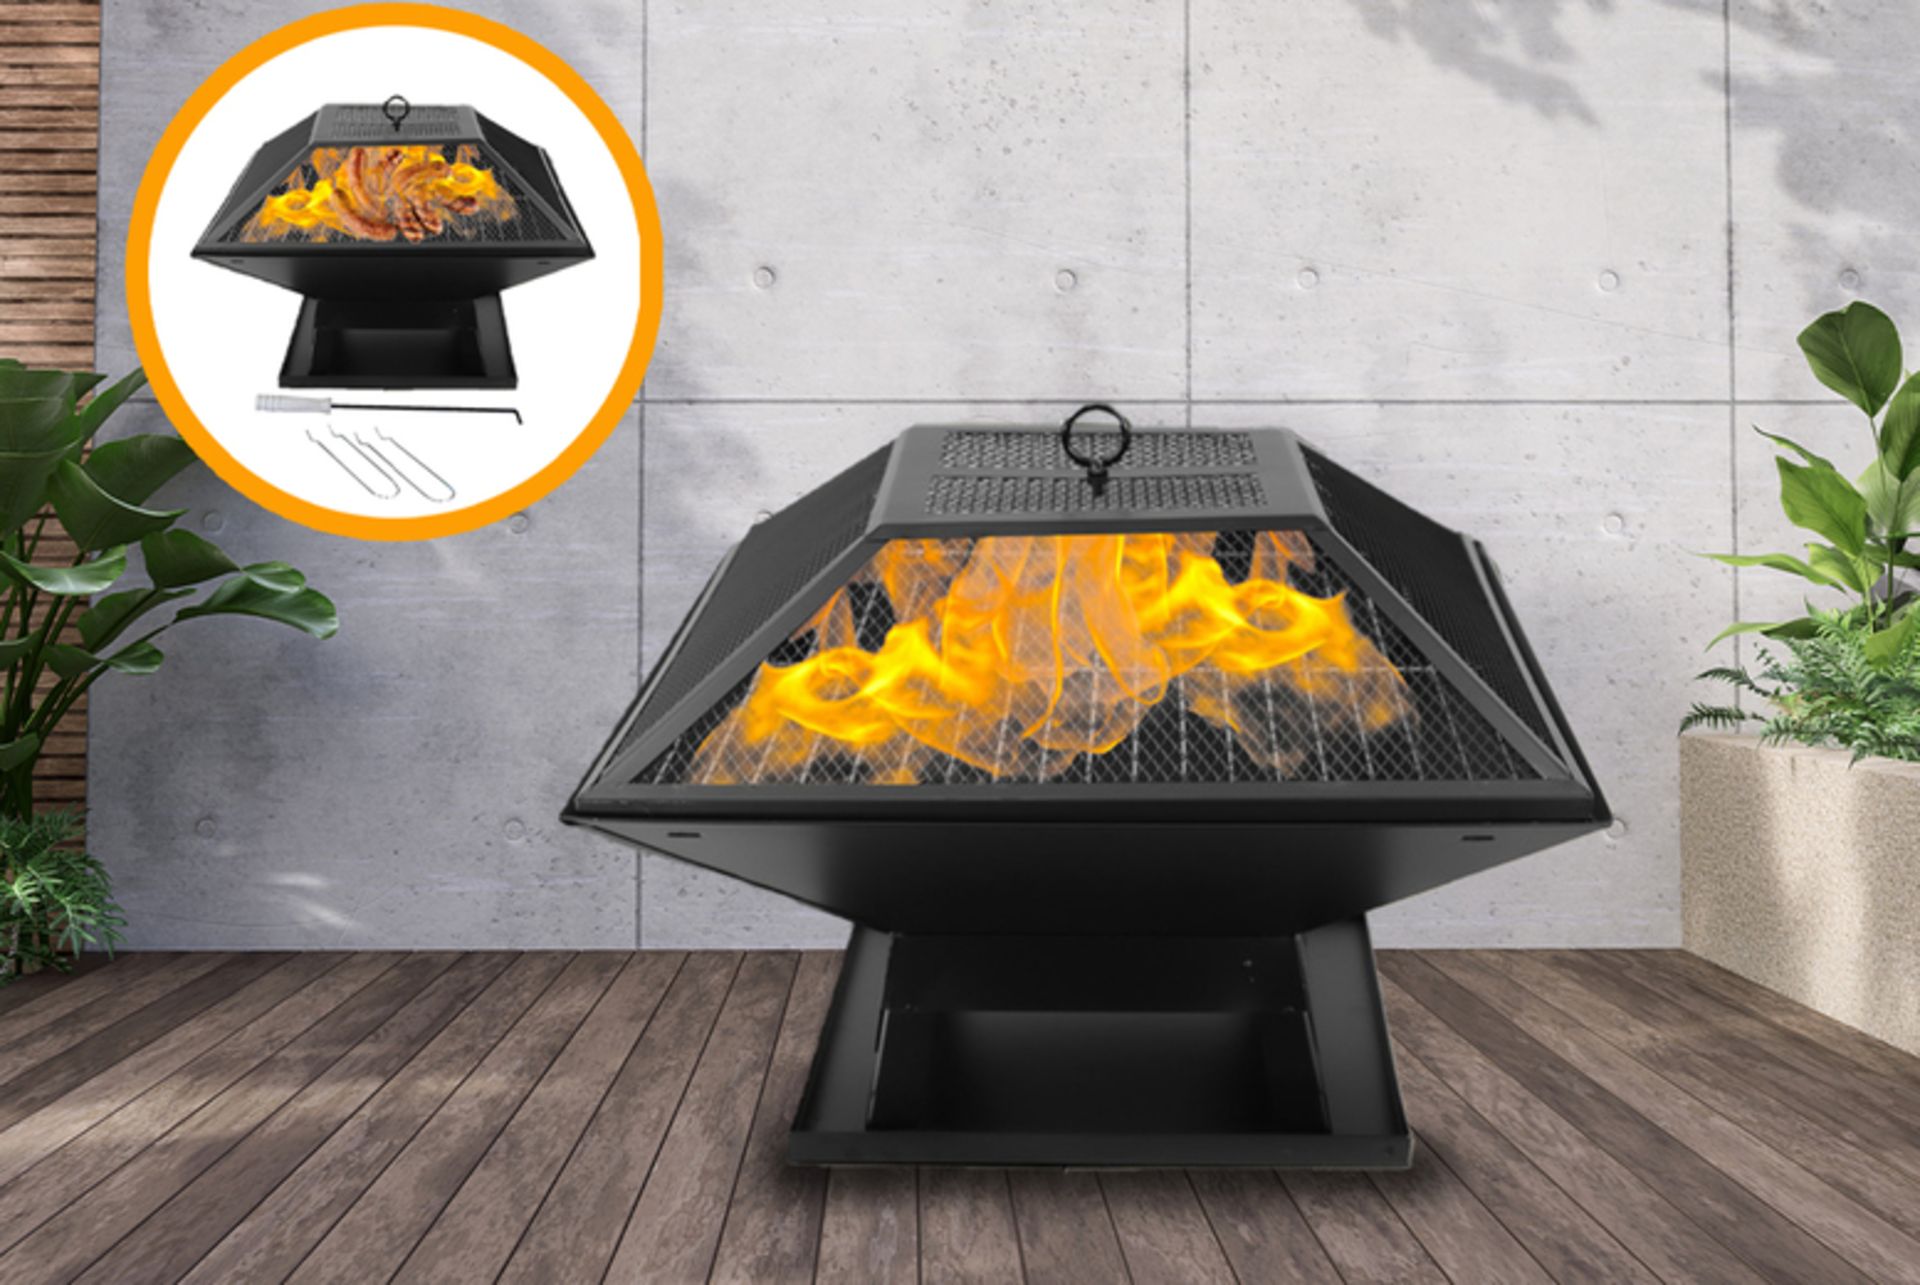 FREE DELIVERY - BBQ GARDEN FIRE PIT AND ACCESSORIES